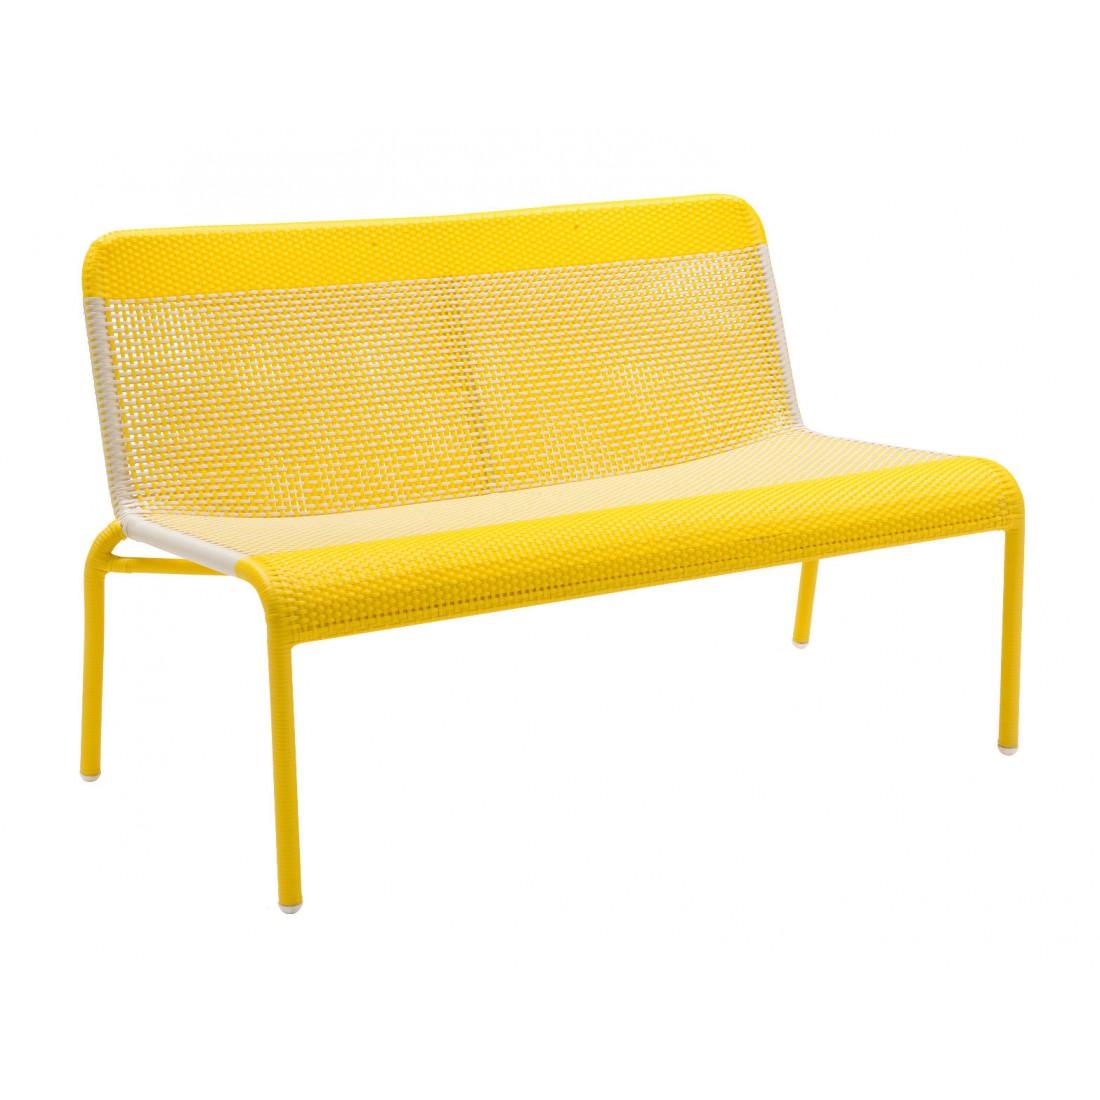 Yellow and white braided resin lounge and outdoor two-seat sofa. It will be perfect on your terrace, in your veranda, your winter garden, even around the swimming pool! French design and Retro style, practical (stackable!) Never used.